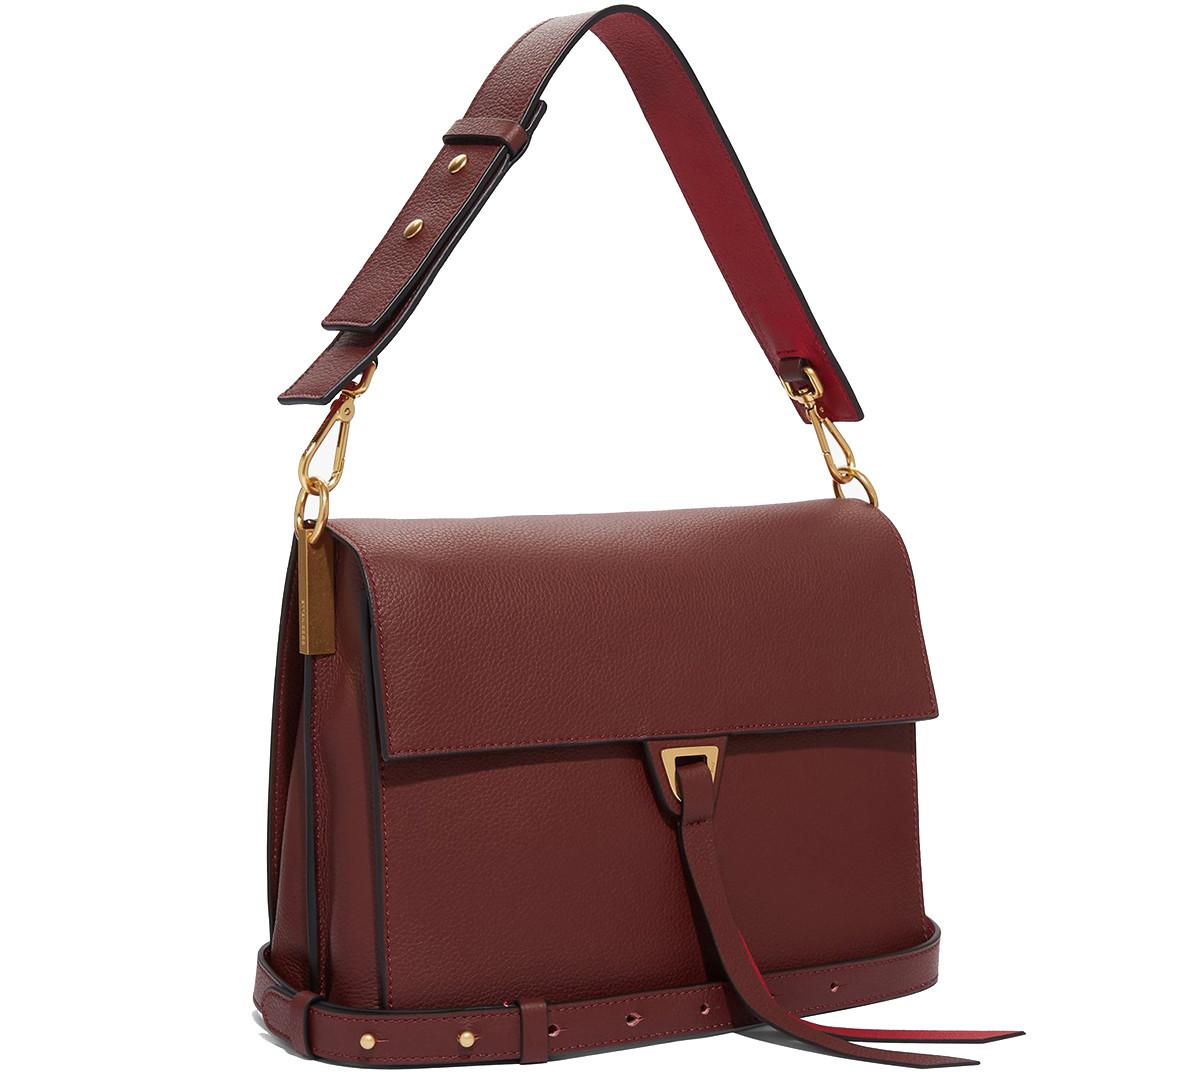 Coccinelle Dark Red Louise Maxi Shoulder Bag at FORZIERI